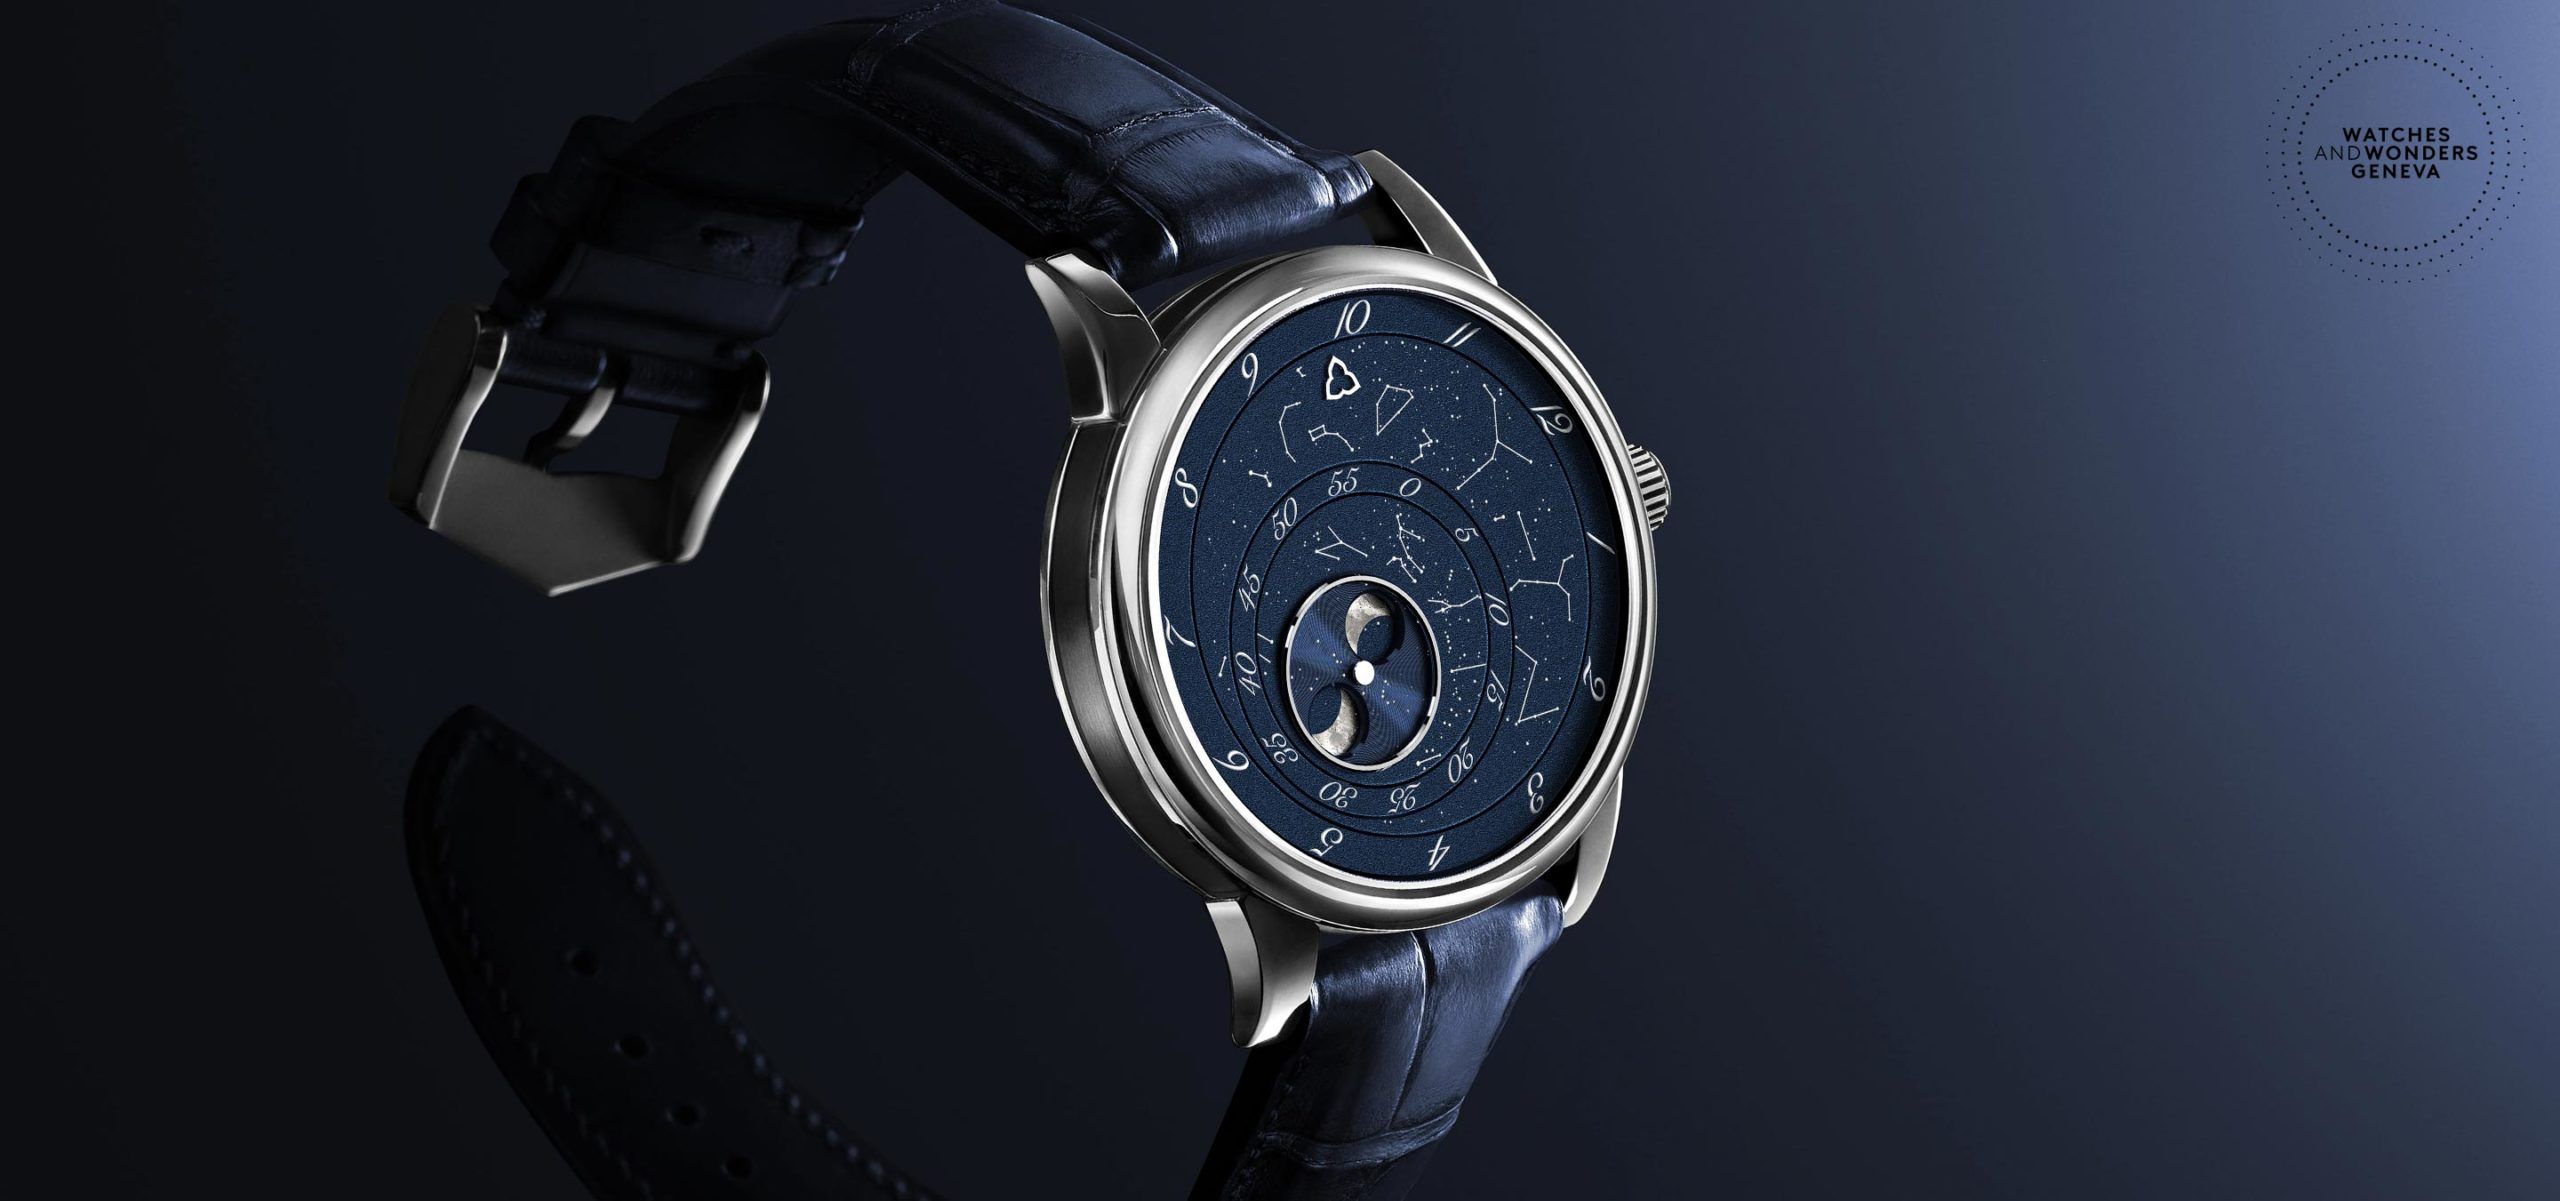 Trilobe’s First Complication With The Limited-Edition L'Heure Exquise Timepieces